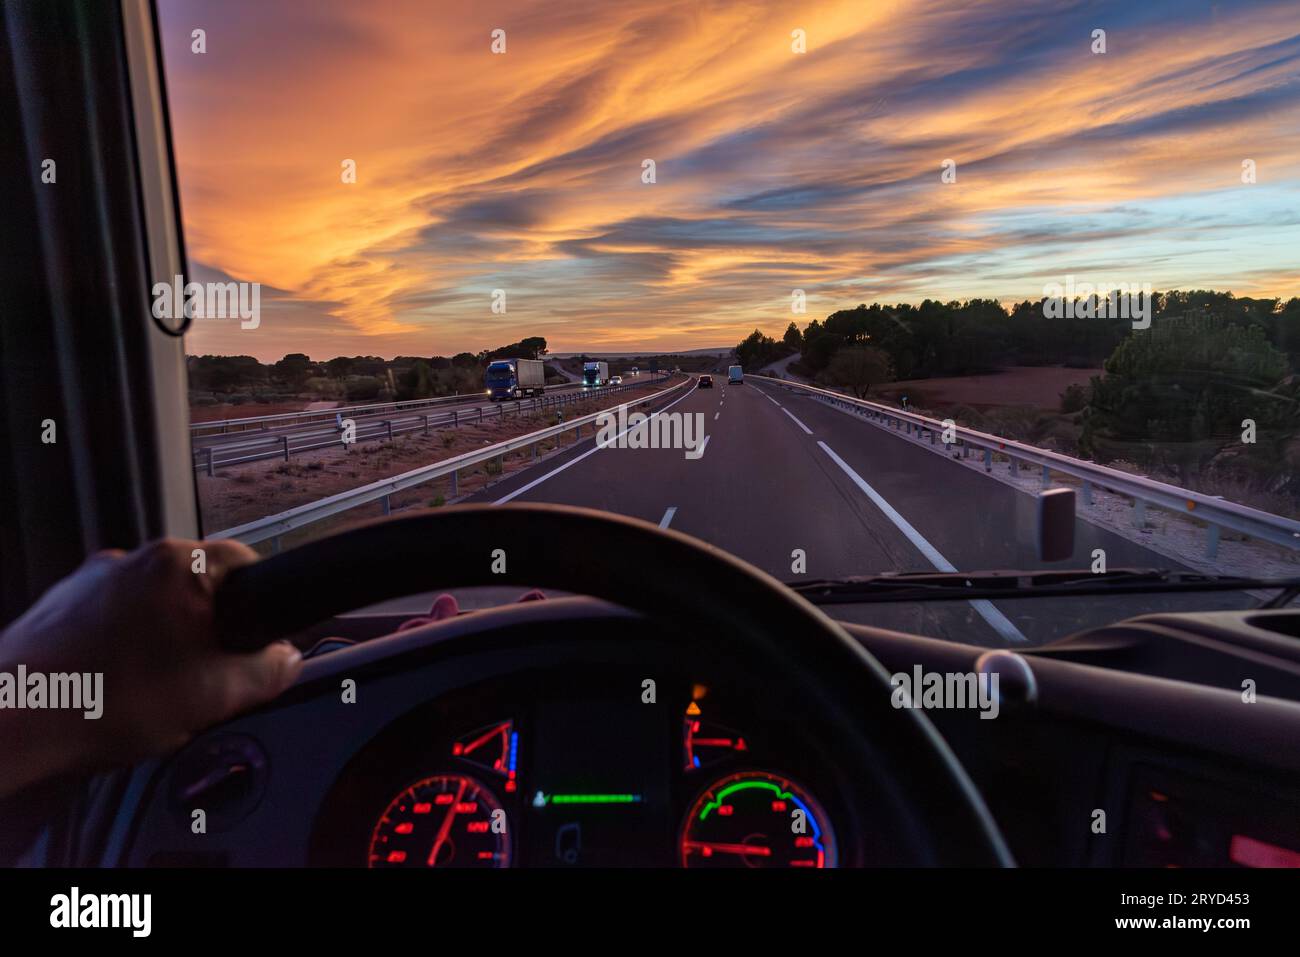 View from the driver's seat of a truck of a highway with vehicles in both directions. Stock Photo